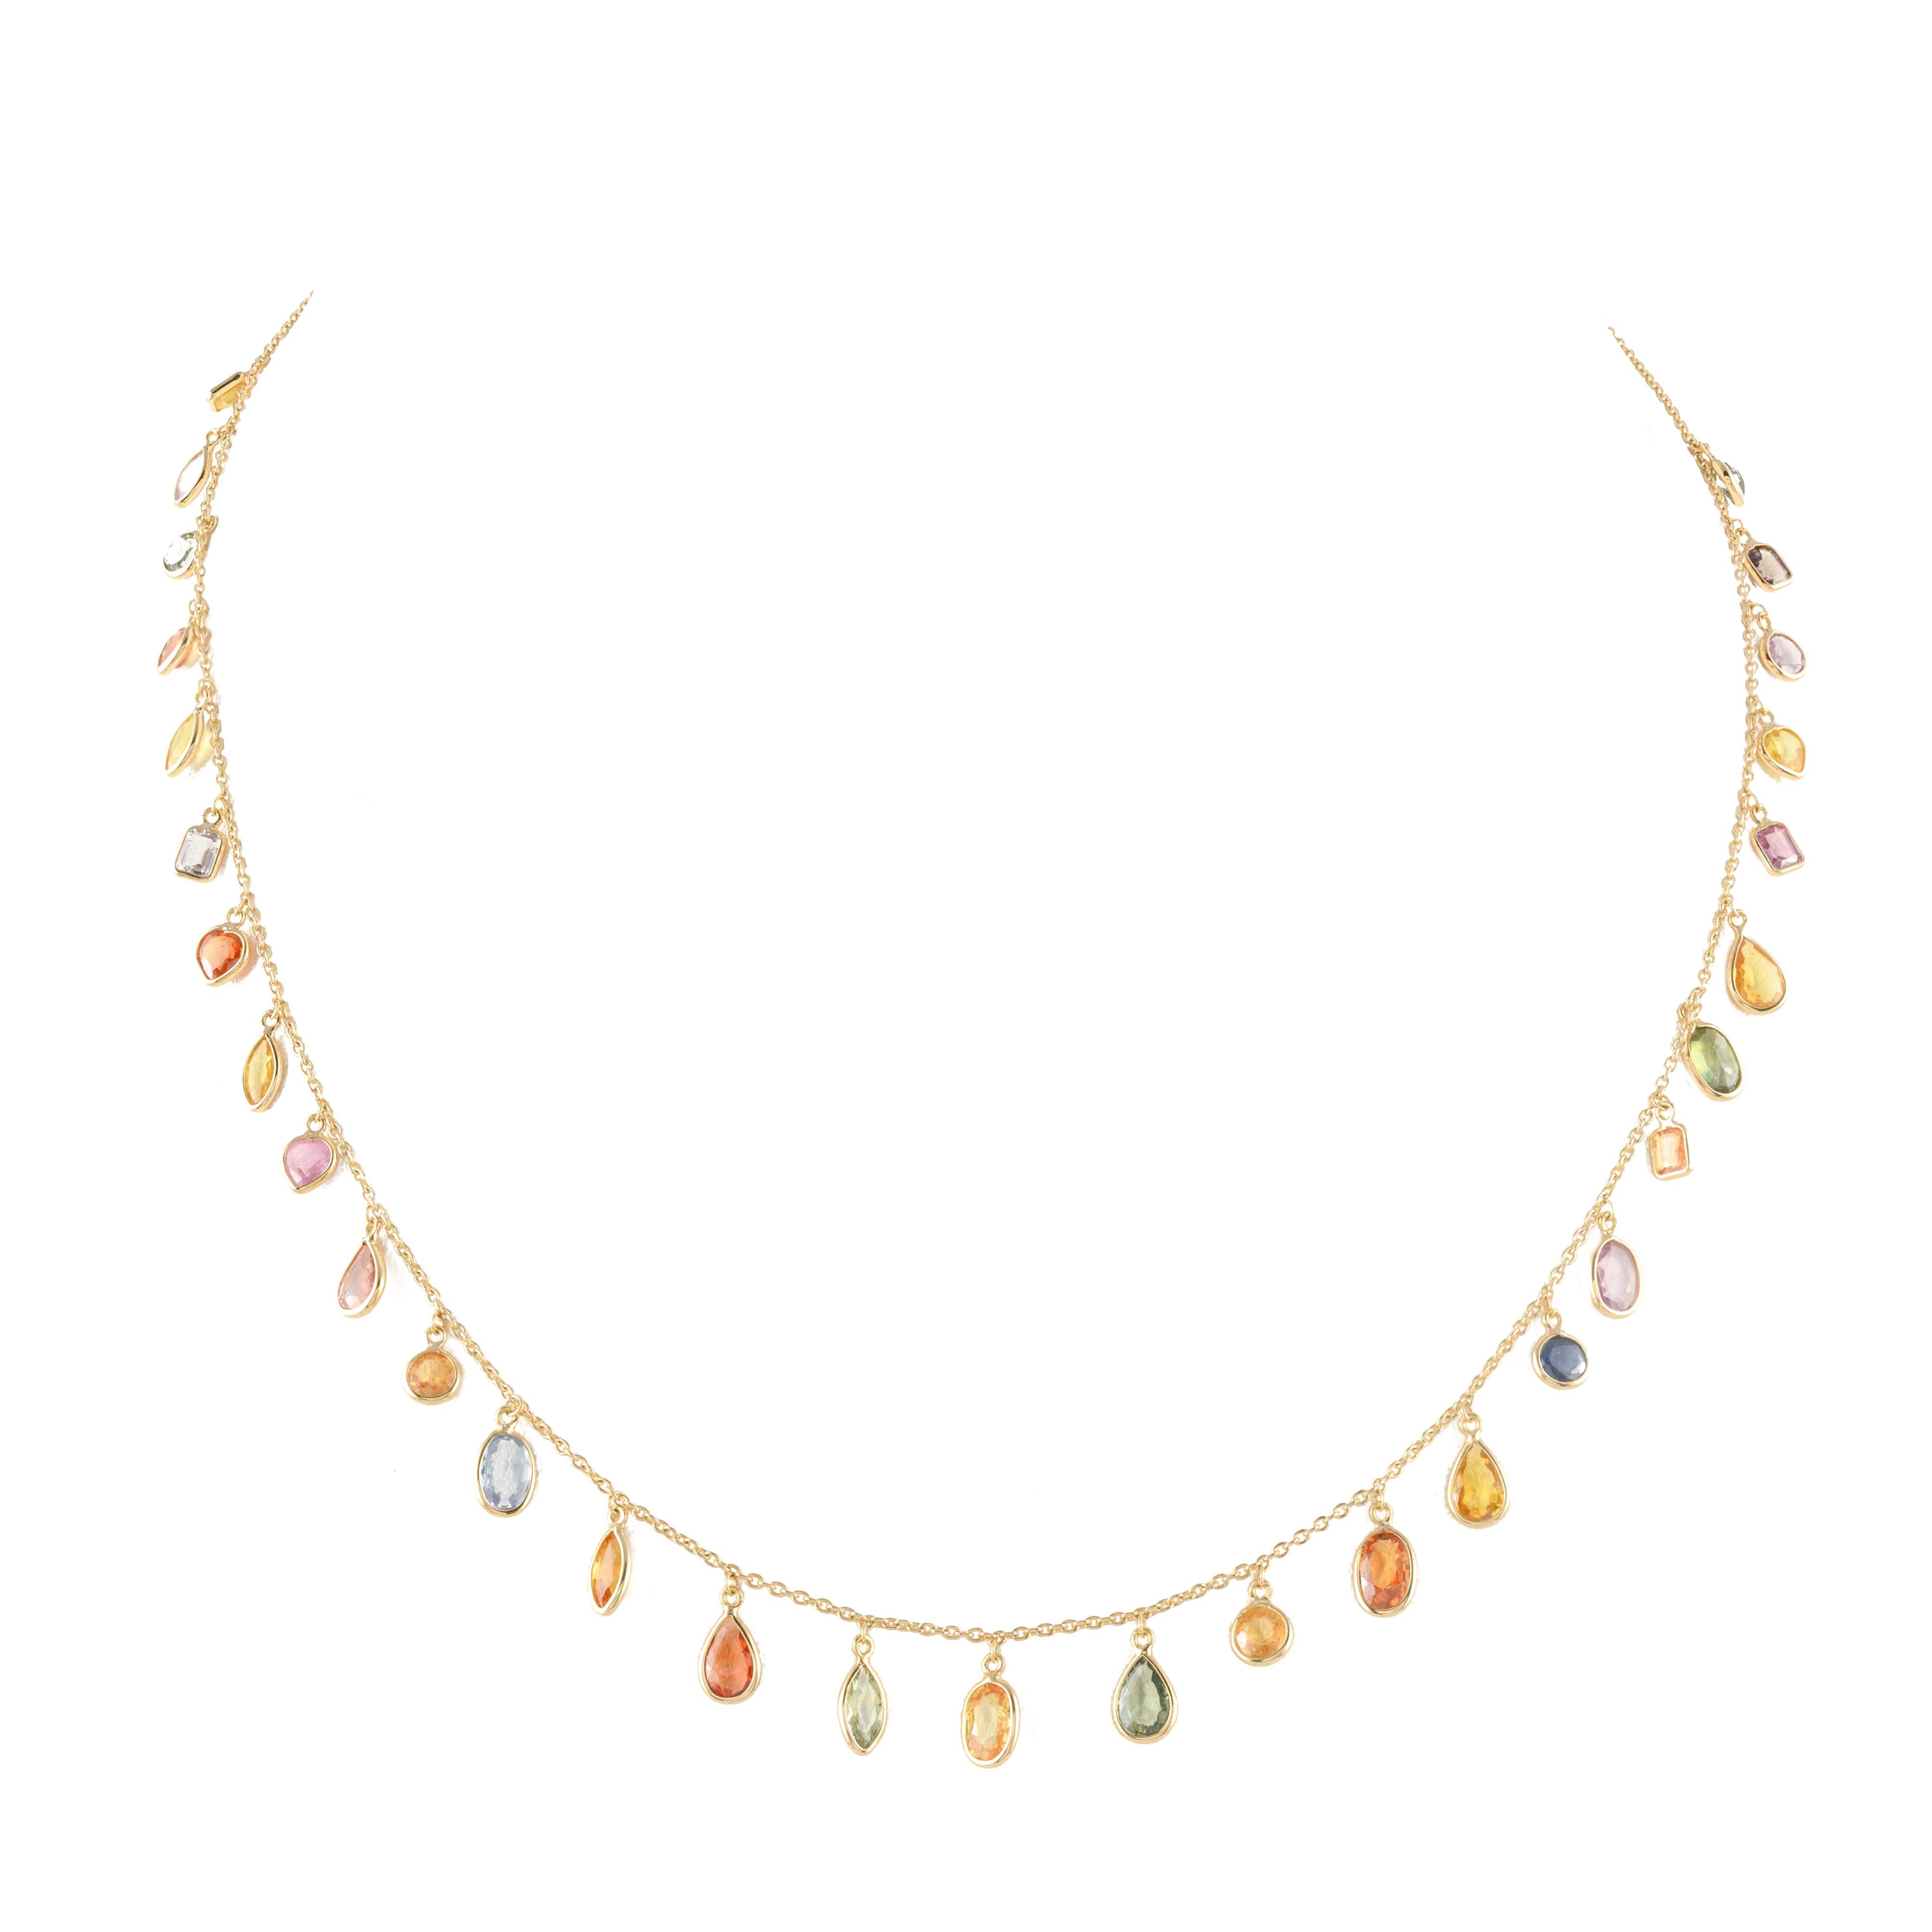 Colorful 18k Yellow Gold Dangling Multi Sapphire Chain Necklace, Bridesmaid Gift For Sale 4